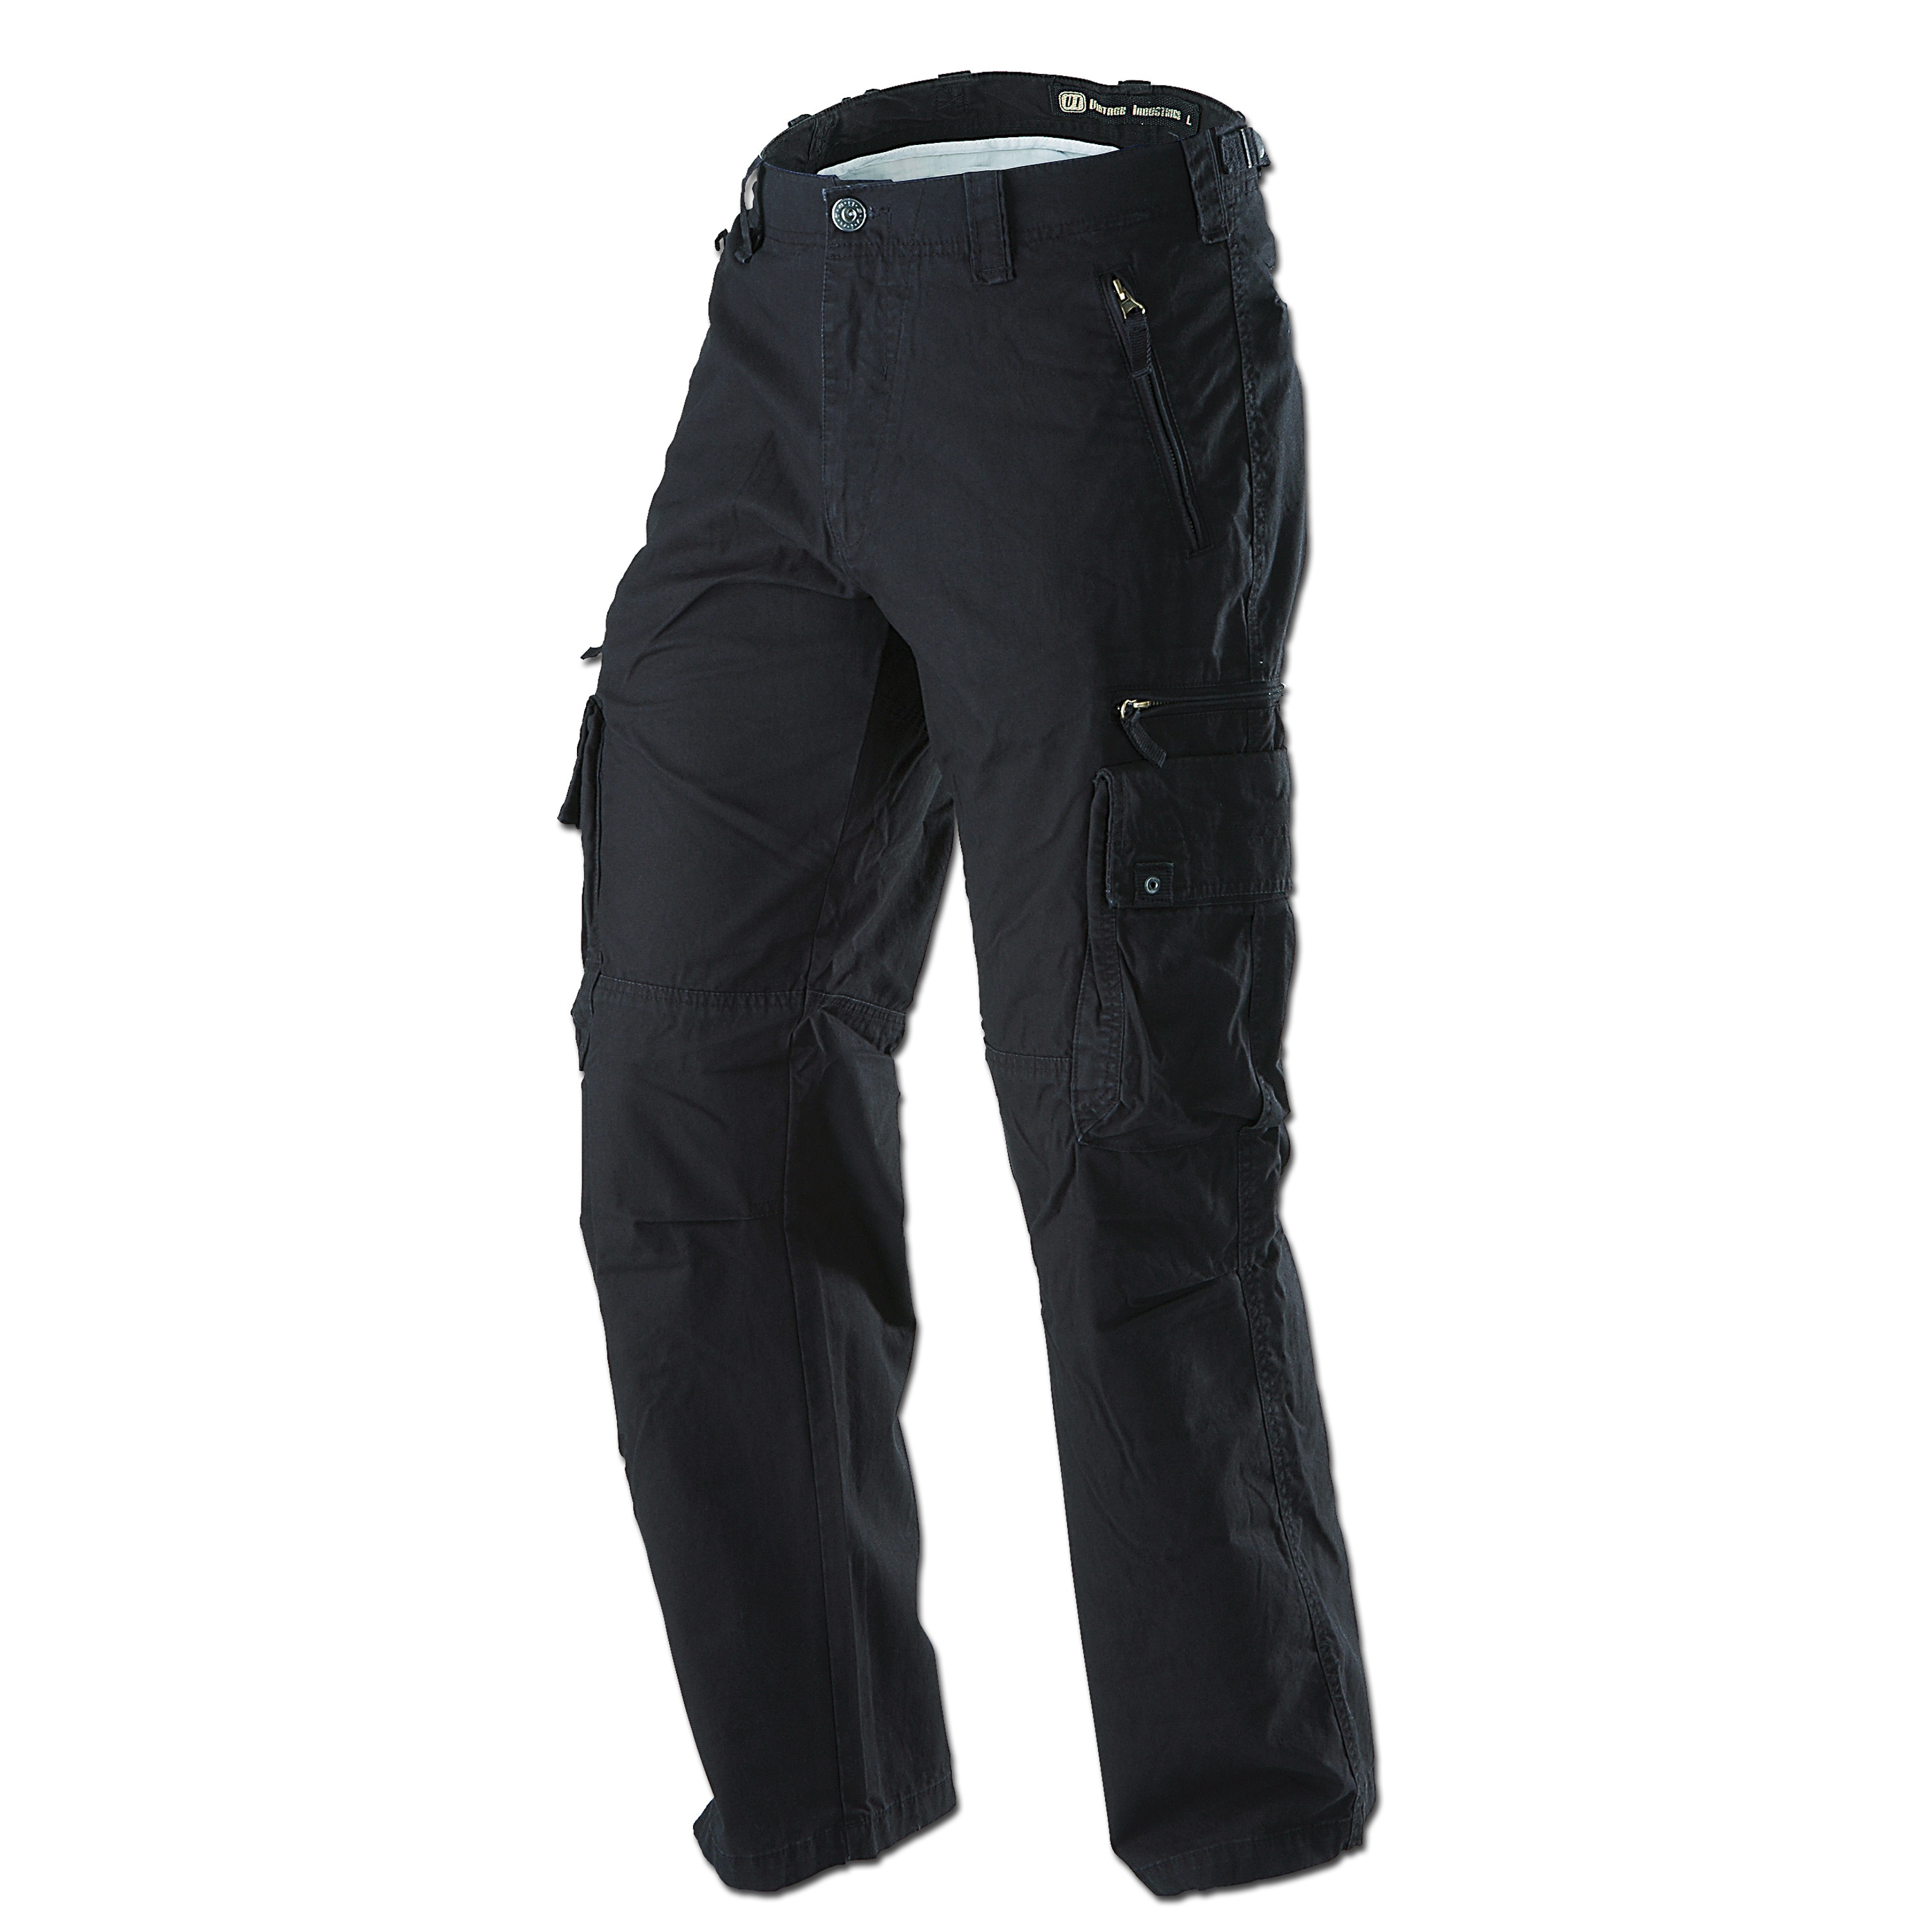 Purchase the Vintage Industries Rico Pants black by ASMC